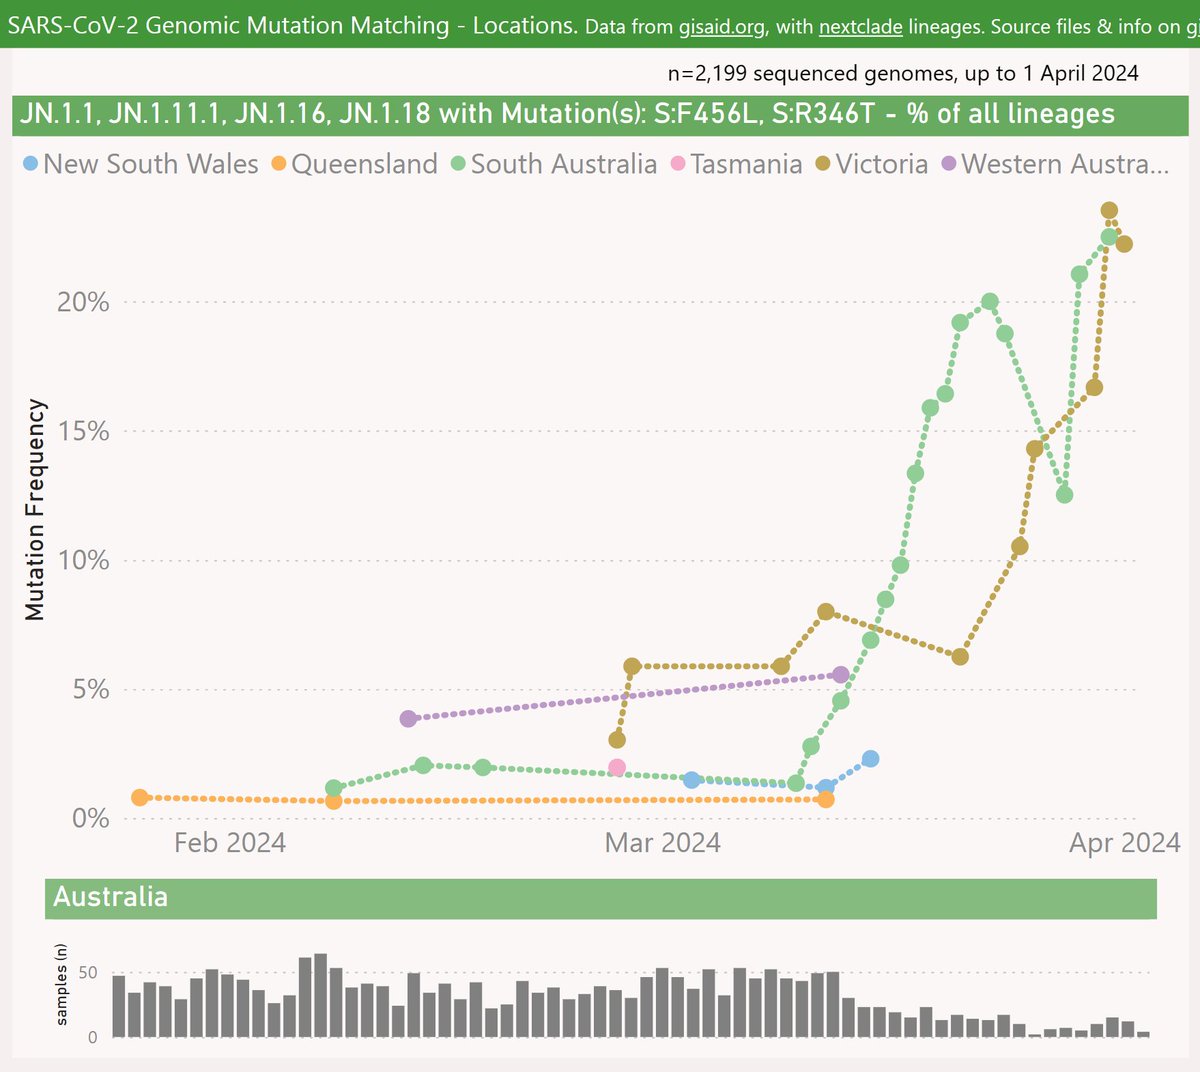 After a long lag, sample data was shared for Victoria (Australia). It has revealed that JN.1.* + 'FLiRT' lineages have been growing strongly there, paralleling the growth reported earlier in South Australia. Very recent data from both states shows the frequency up to 22% 🧵